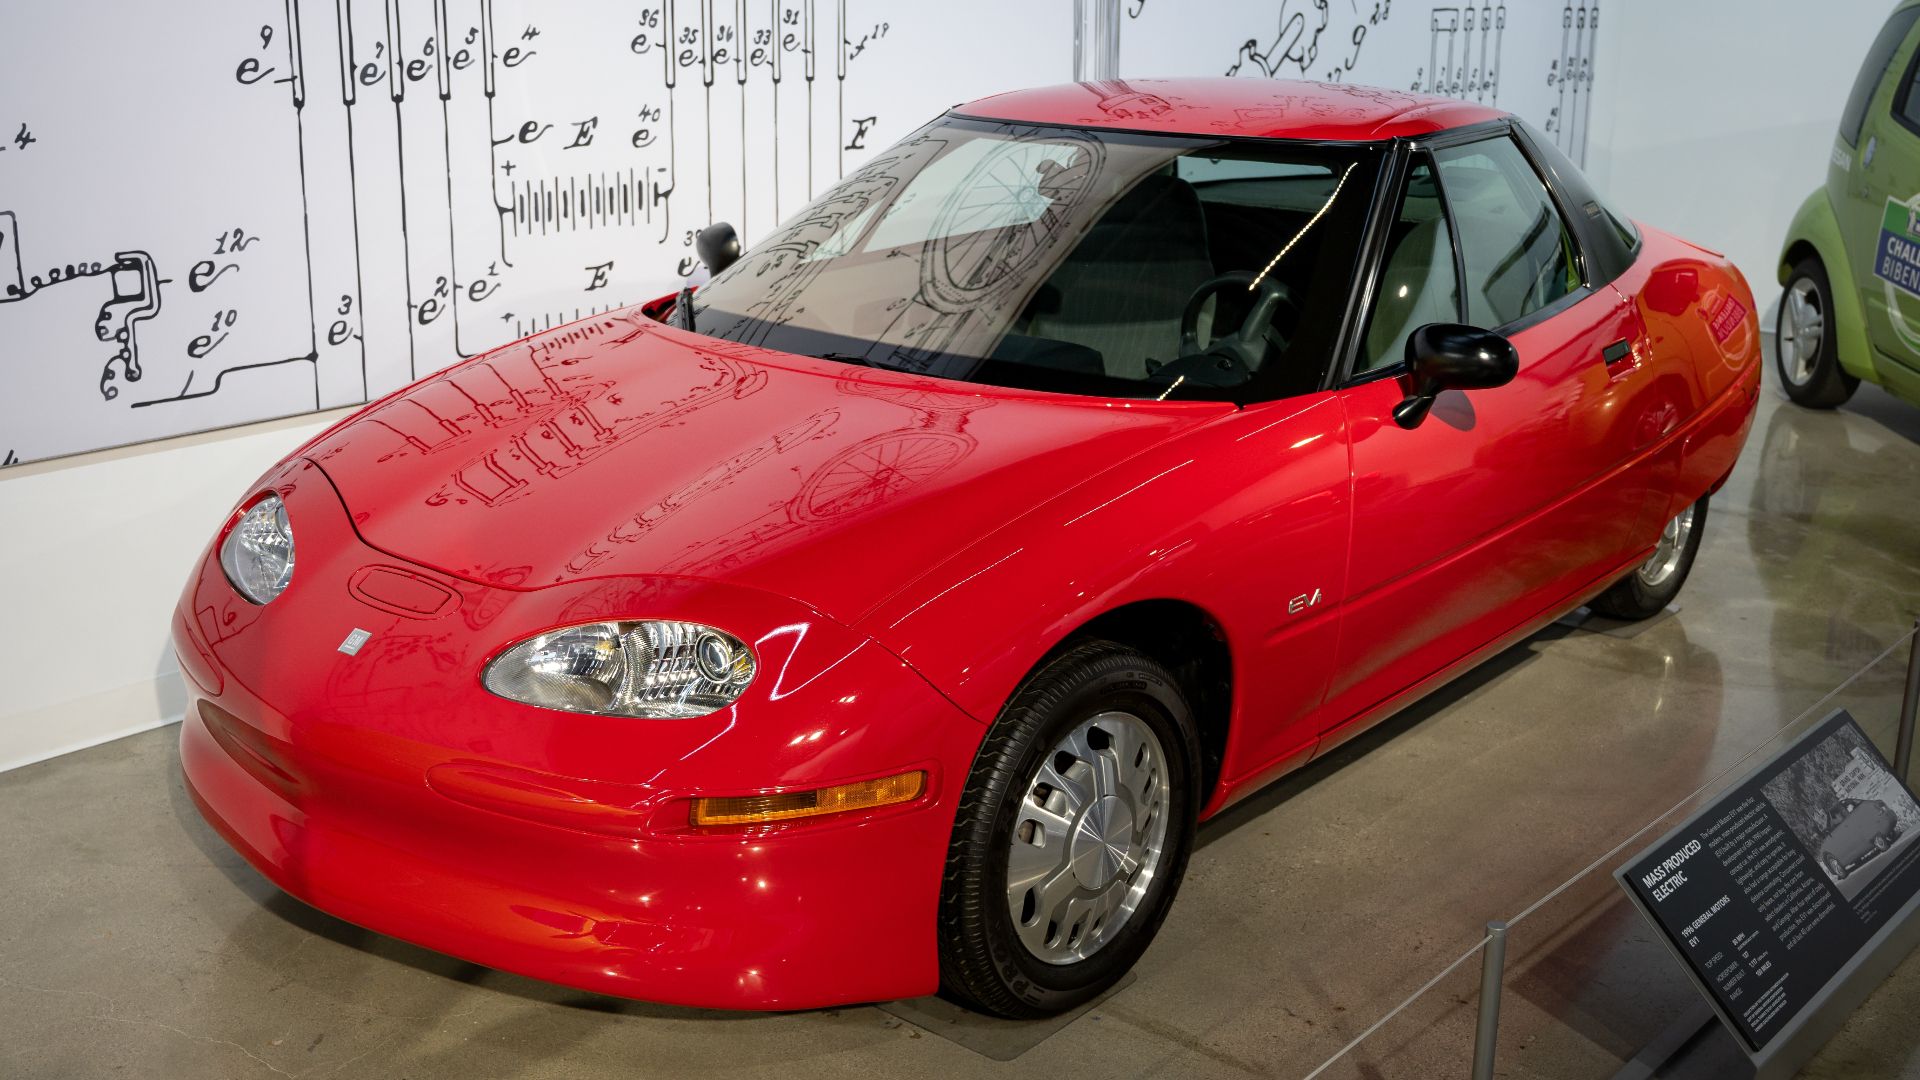 Here's What Really Happened To The GM EV1 Electric Car